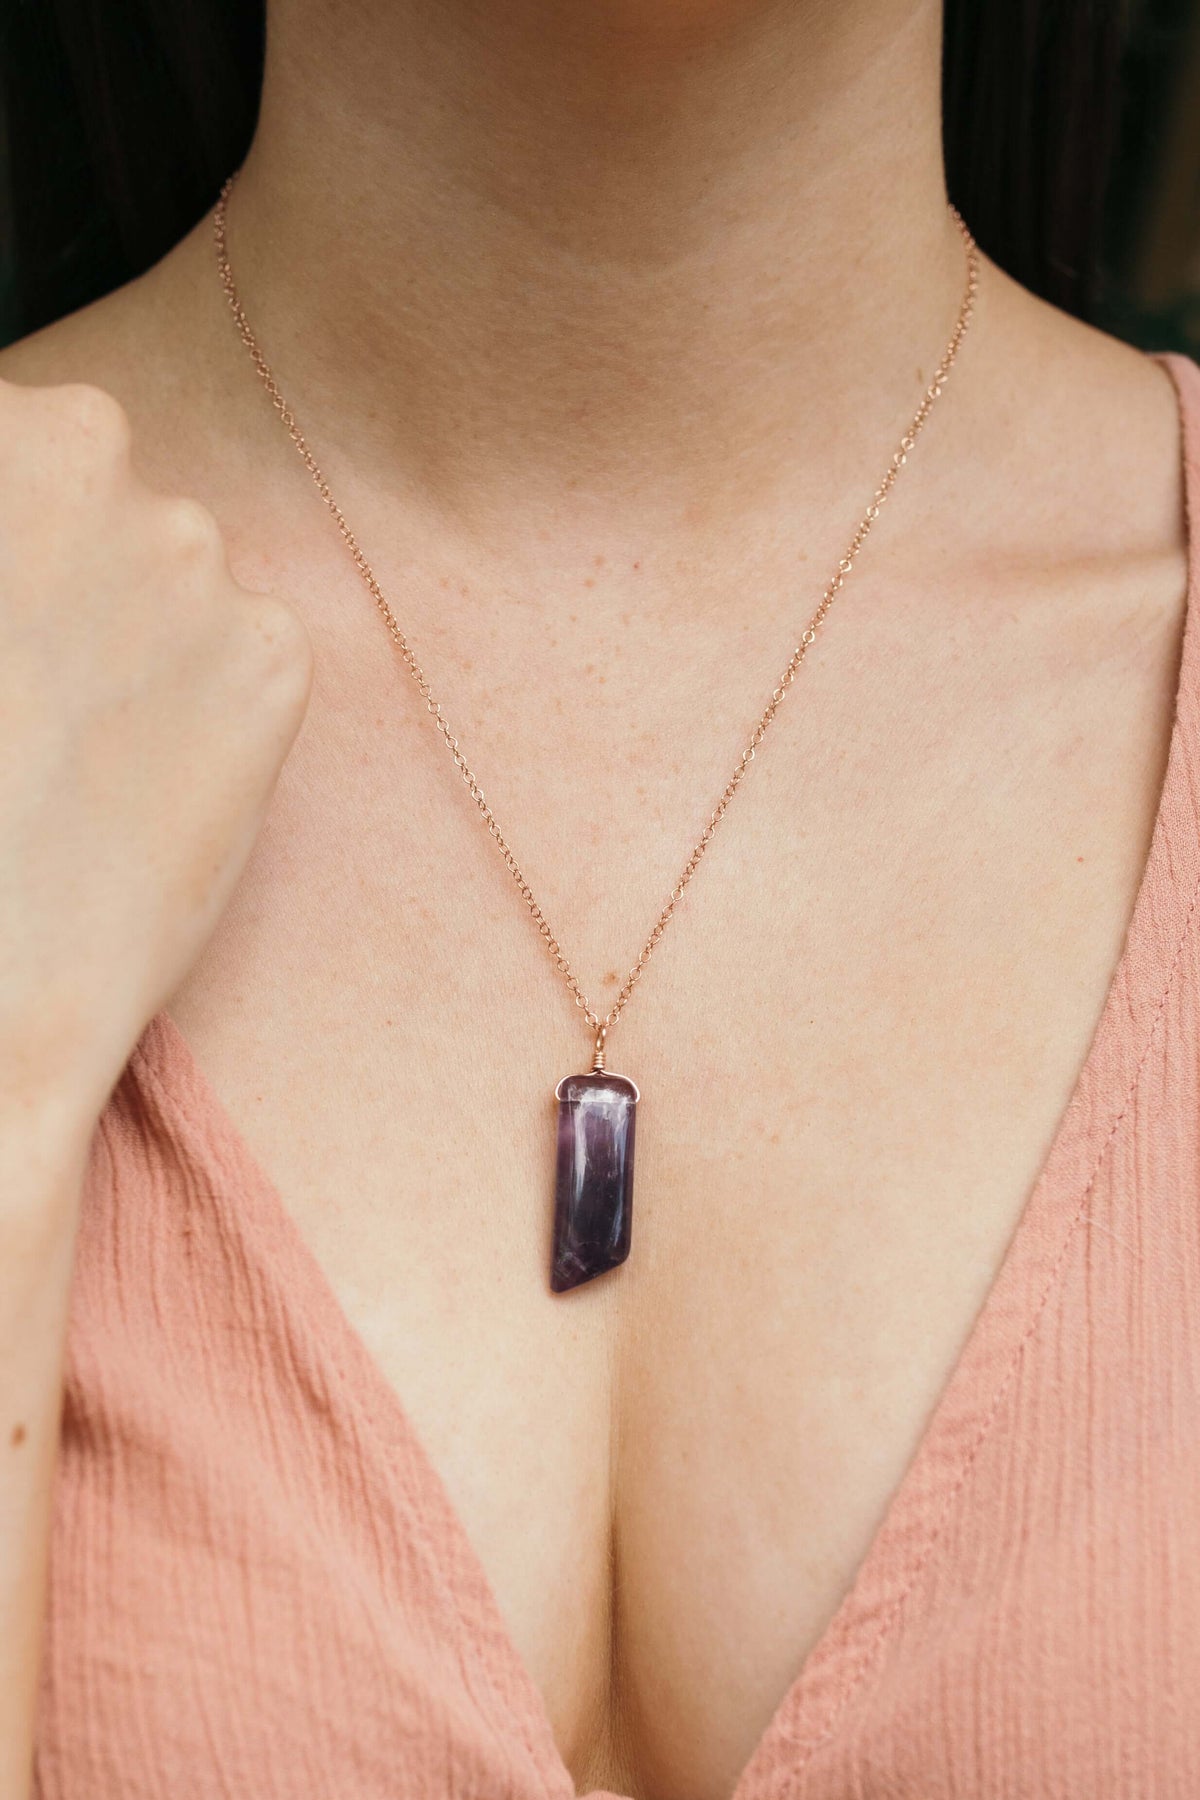 Smooth Point Pendant Necklace - Amethyst - 14K Rose Gold Fill - Luna Tide Handmade Jewellery